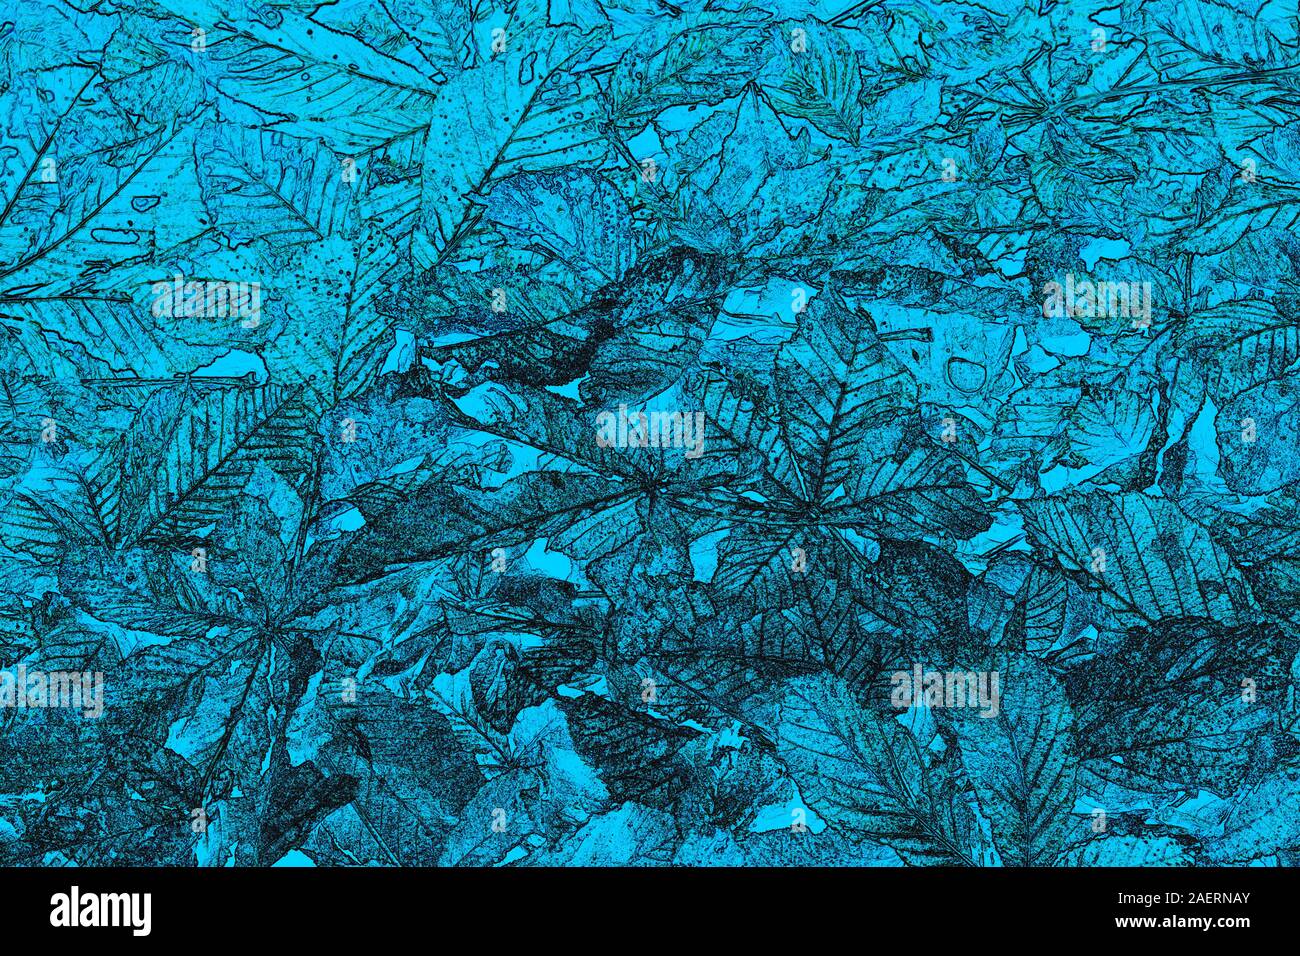 Aquamarine colored background with natural plant textures of different shades of aquamarine Stock Photo